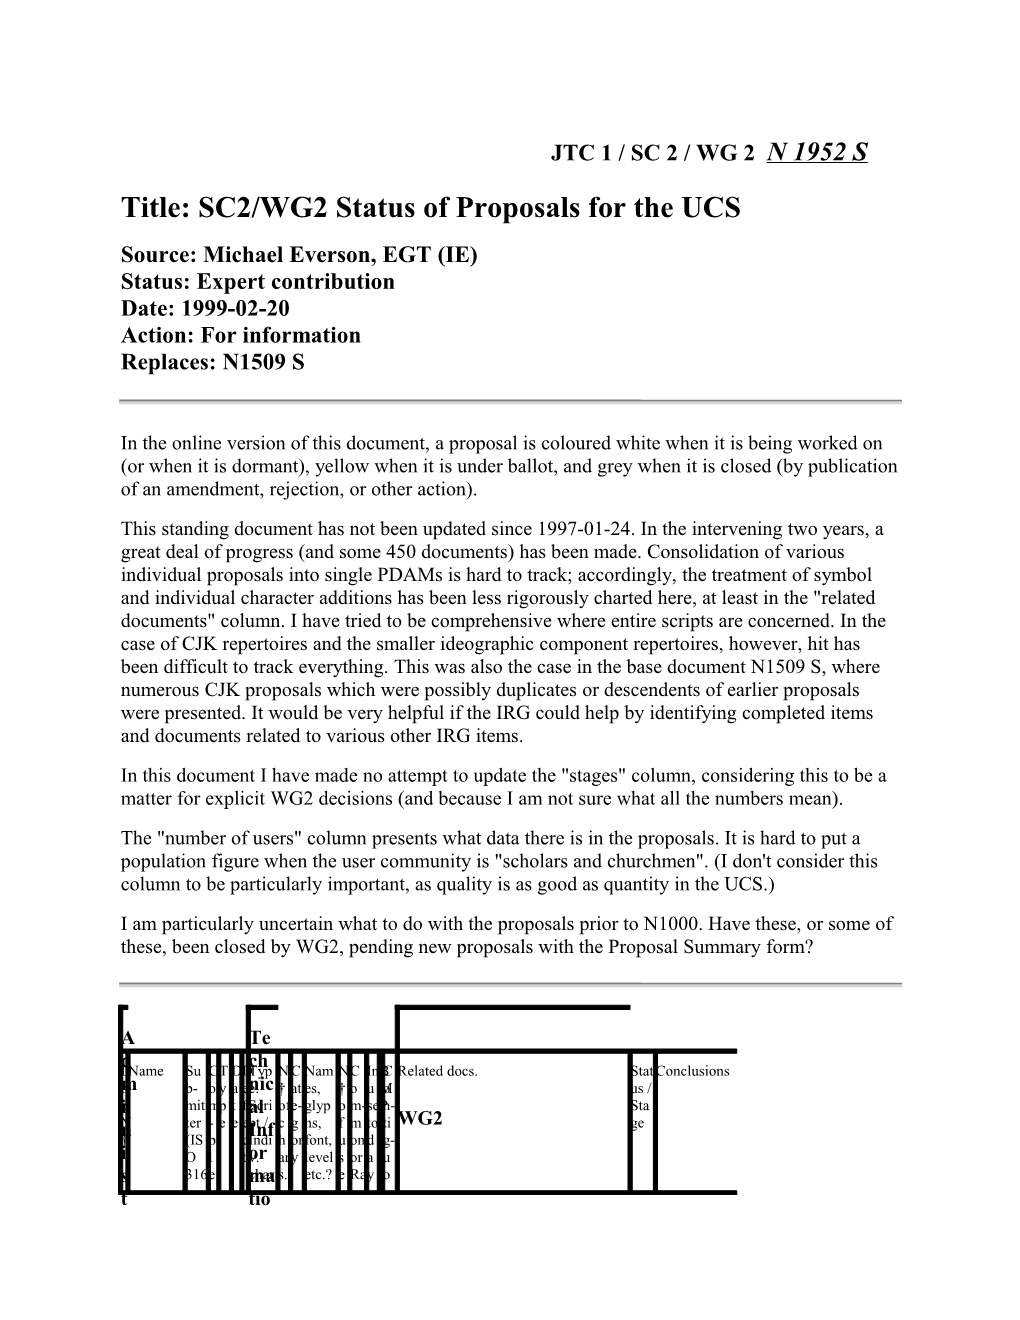 SC2/WG2 Status of Proposals for the UCS